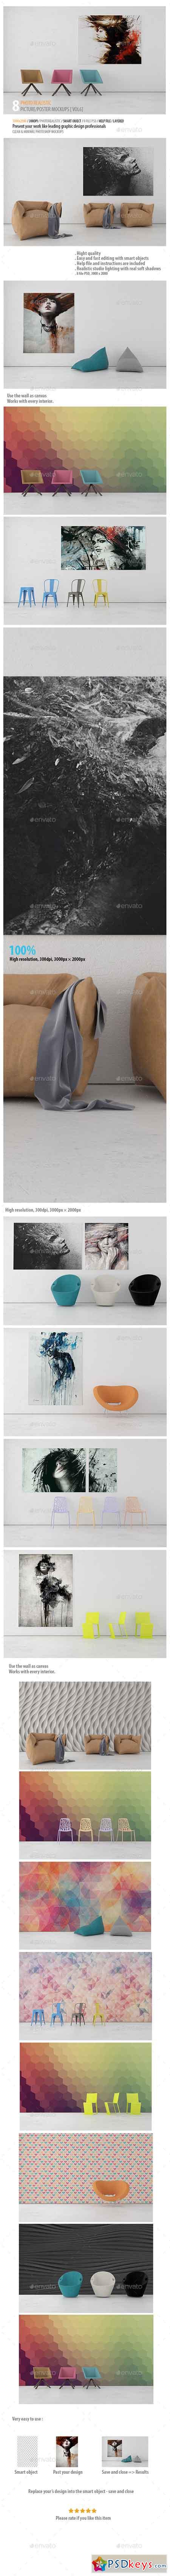 Picture Poster Mockups [vol6] 15102085